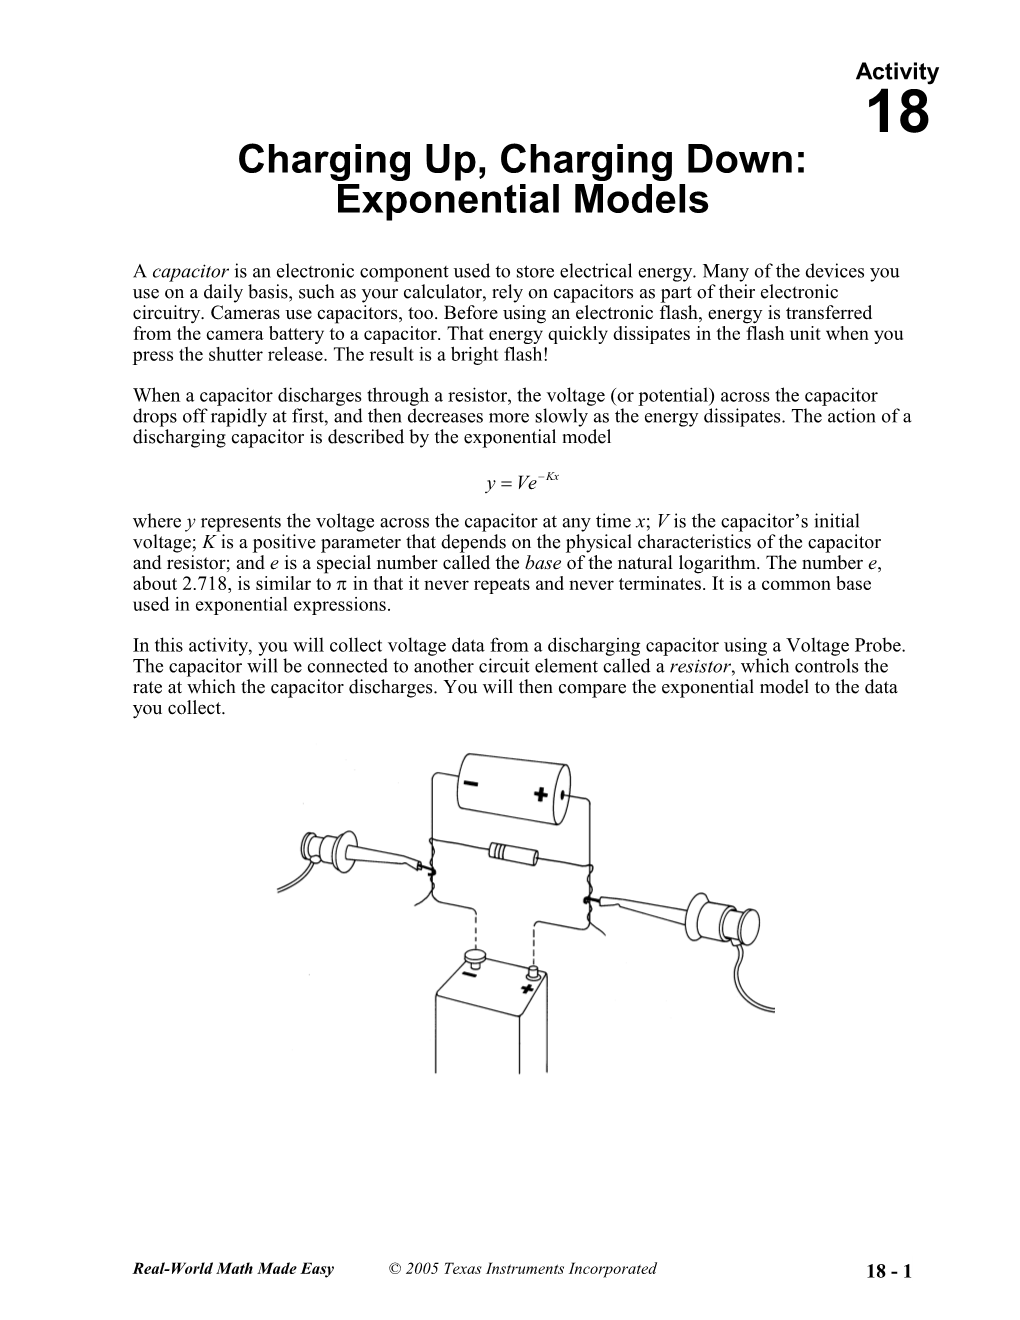 Charging Up, Charging Down: Exponential Models